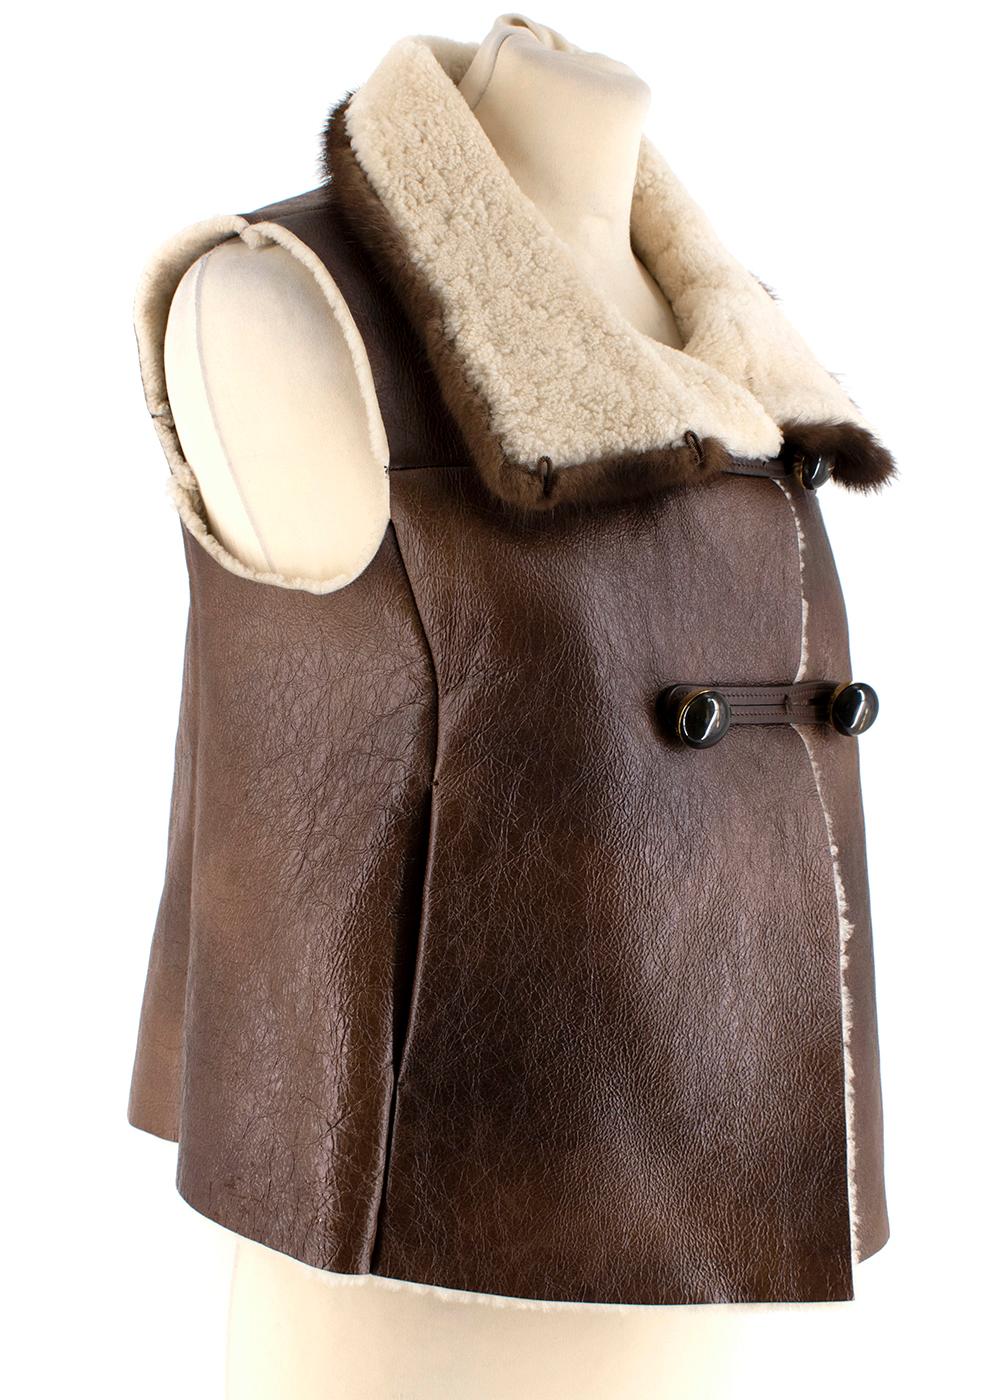 Prada Brown Shearling Lined Sheepskin Leather Gilet with Mink Fur Trim

- Button Toggle Fastening
- Fabric Clasp on Mink Fur Collar
- Two Outside Pockets 
- Comes with Spare Button 

Materials
- 100% Dyed Sheep Fur (Spain) 
- 100% Natural Mink Fur